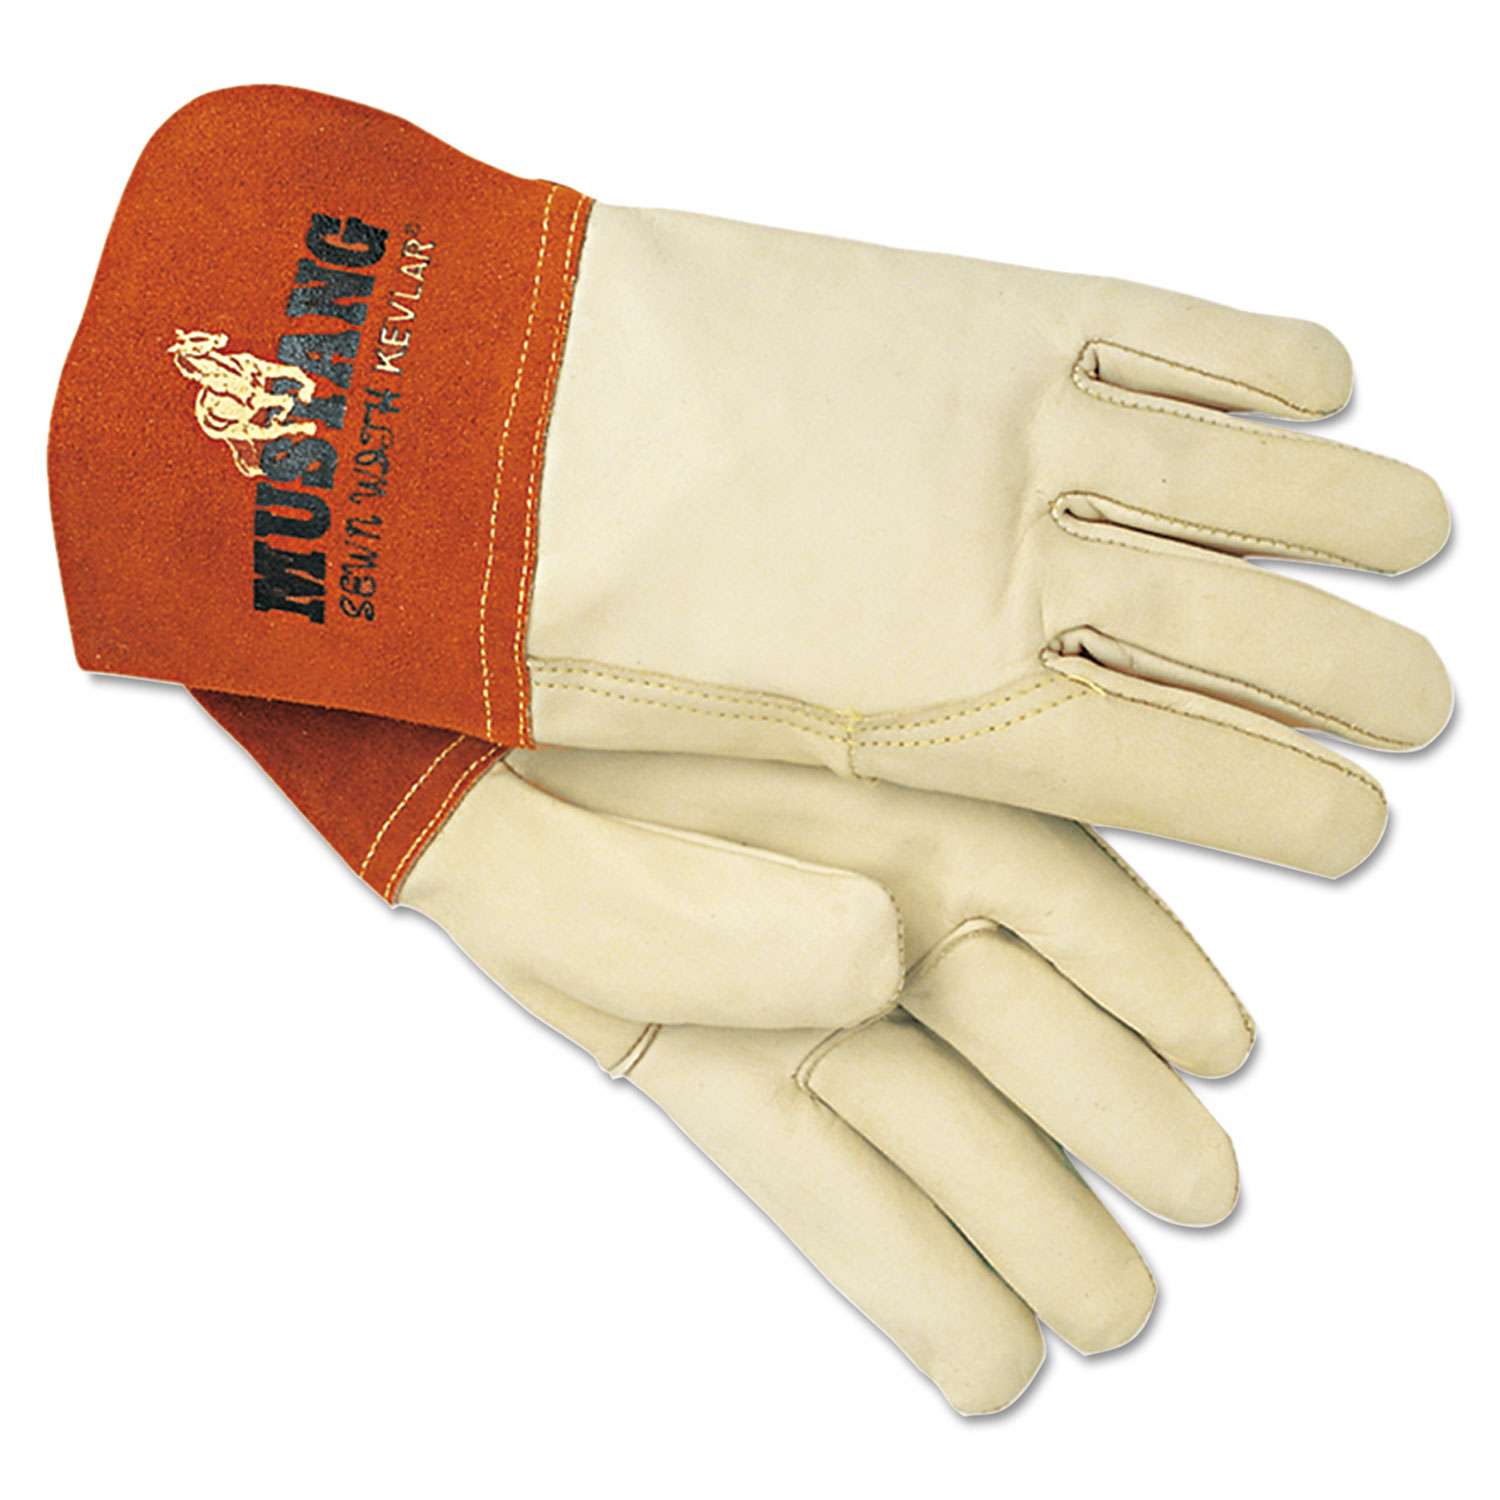  MCR Safety 4950L Mustang MIG/TIG Leather Welding Gloves, White/Russet, Large, 12 Pairs (MPG4950L) 